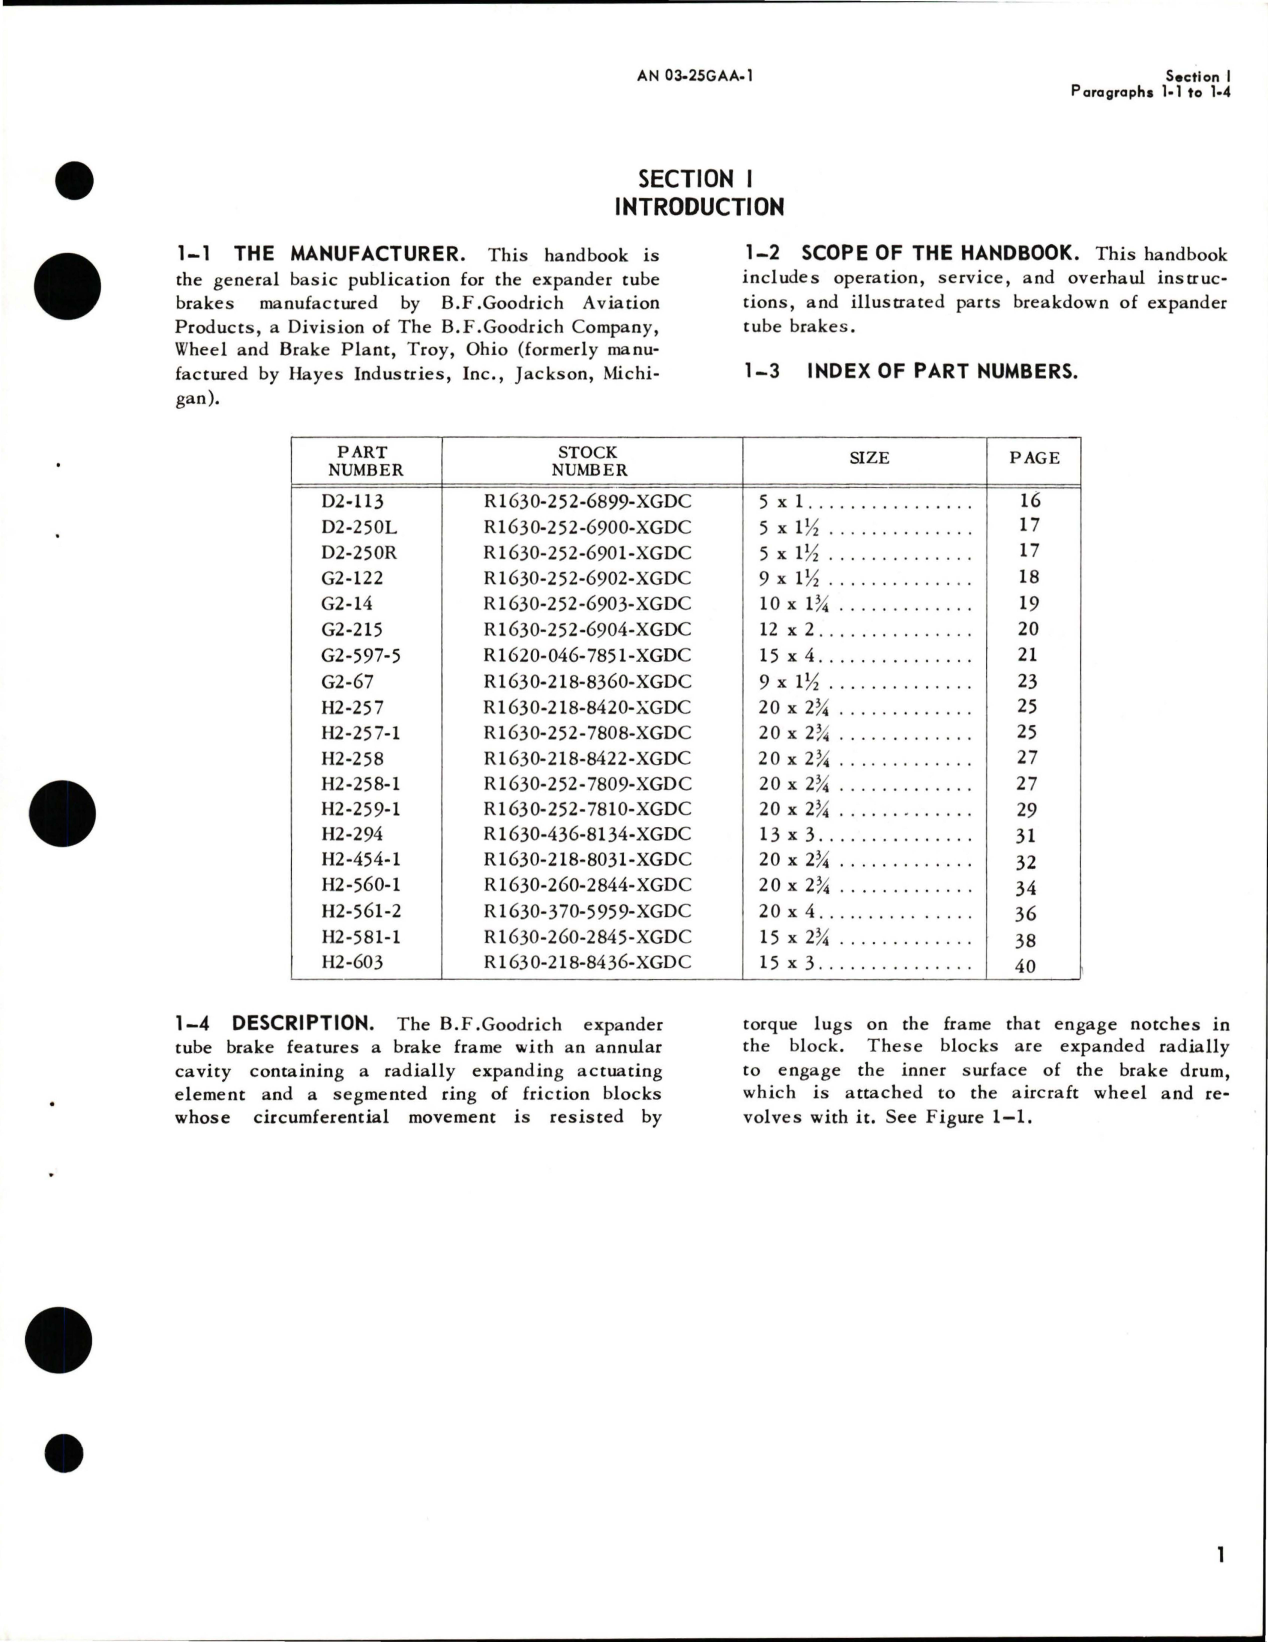 Sample page 5 from AirCorps Library document: Operation, Service and Overhaul Instructions with Illustrated Parts Breakdown for Expander Tube Brakes 